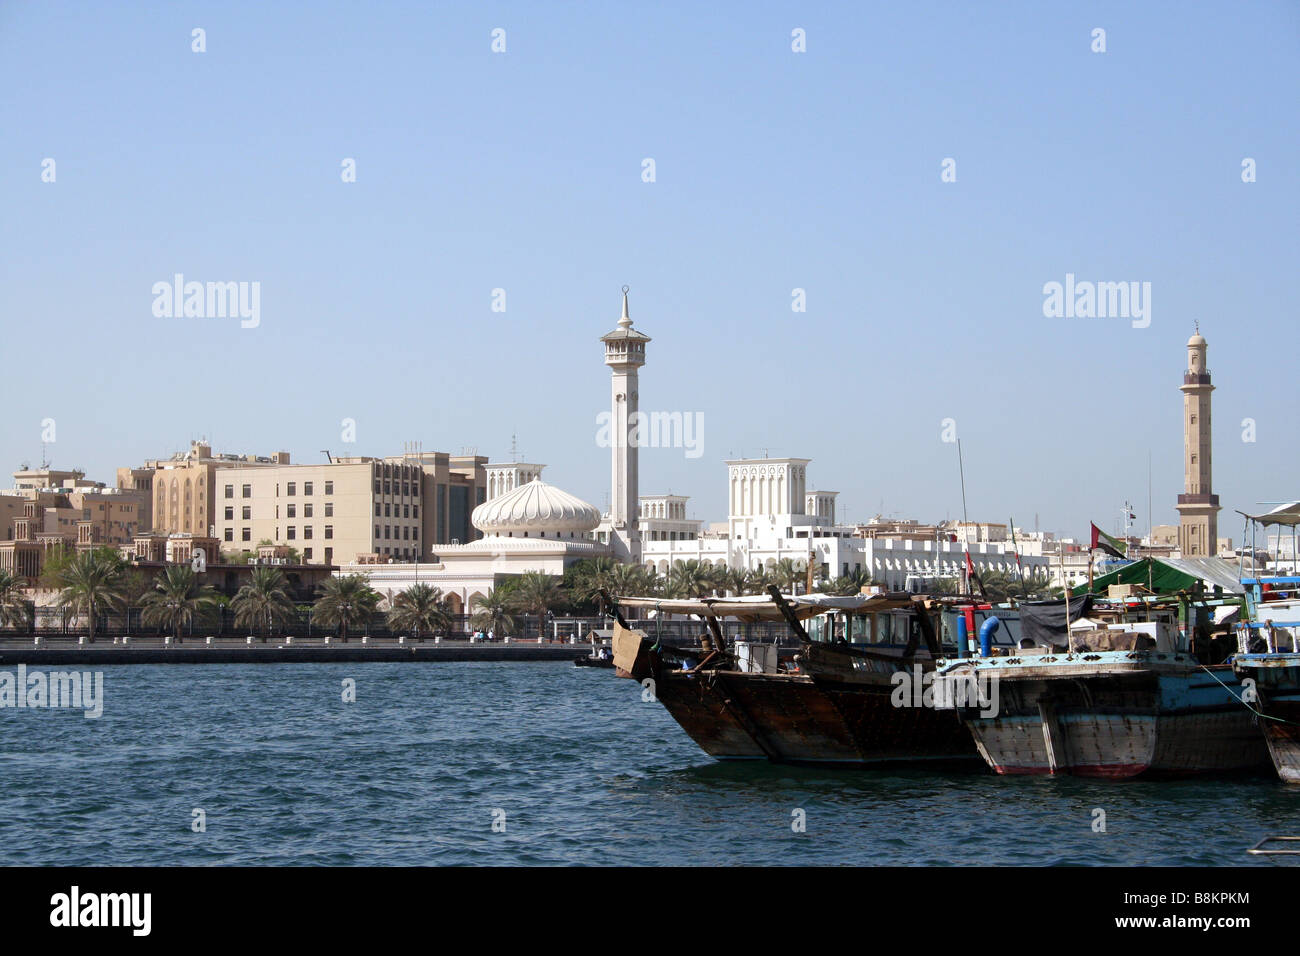 Traditional Dhows/Boats on the Creek in Dubai in the UAE Stock Photo